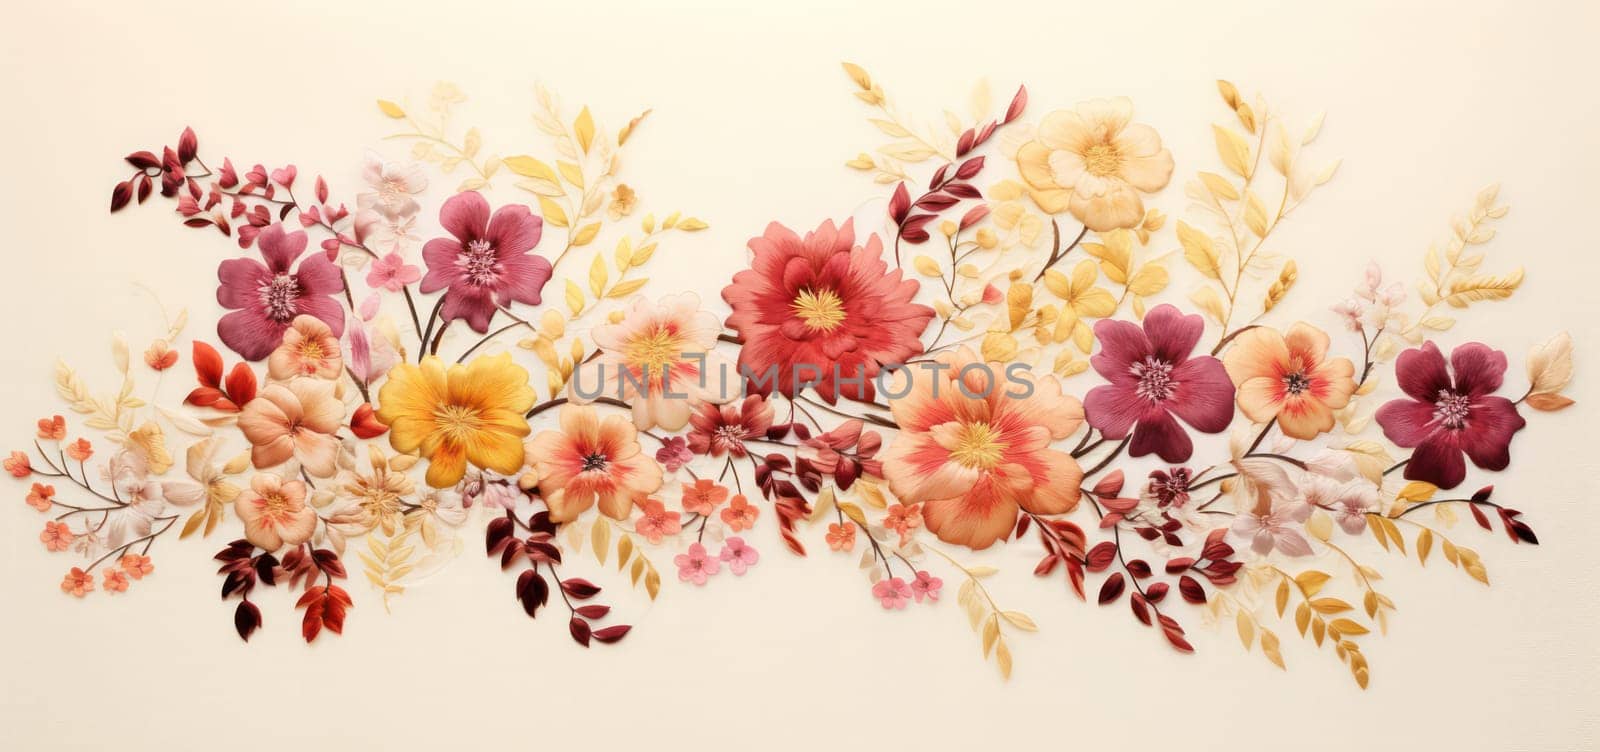 Romantic Floral Bouquet: A Beautiful Vintage Watercolor Illustration of Pink Blossoms in a Botanical Garden by Vichizh